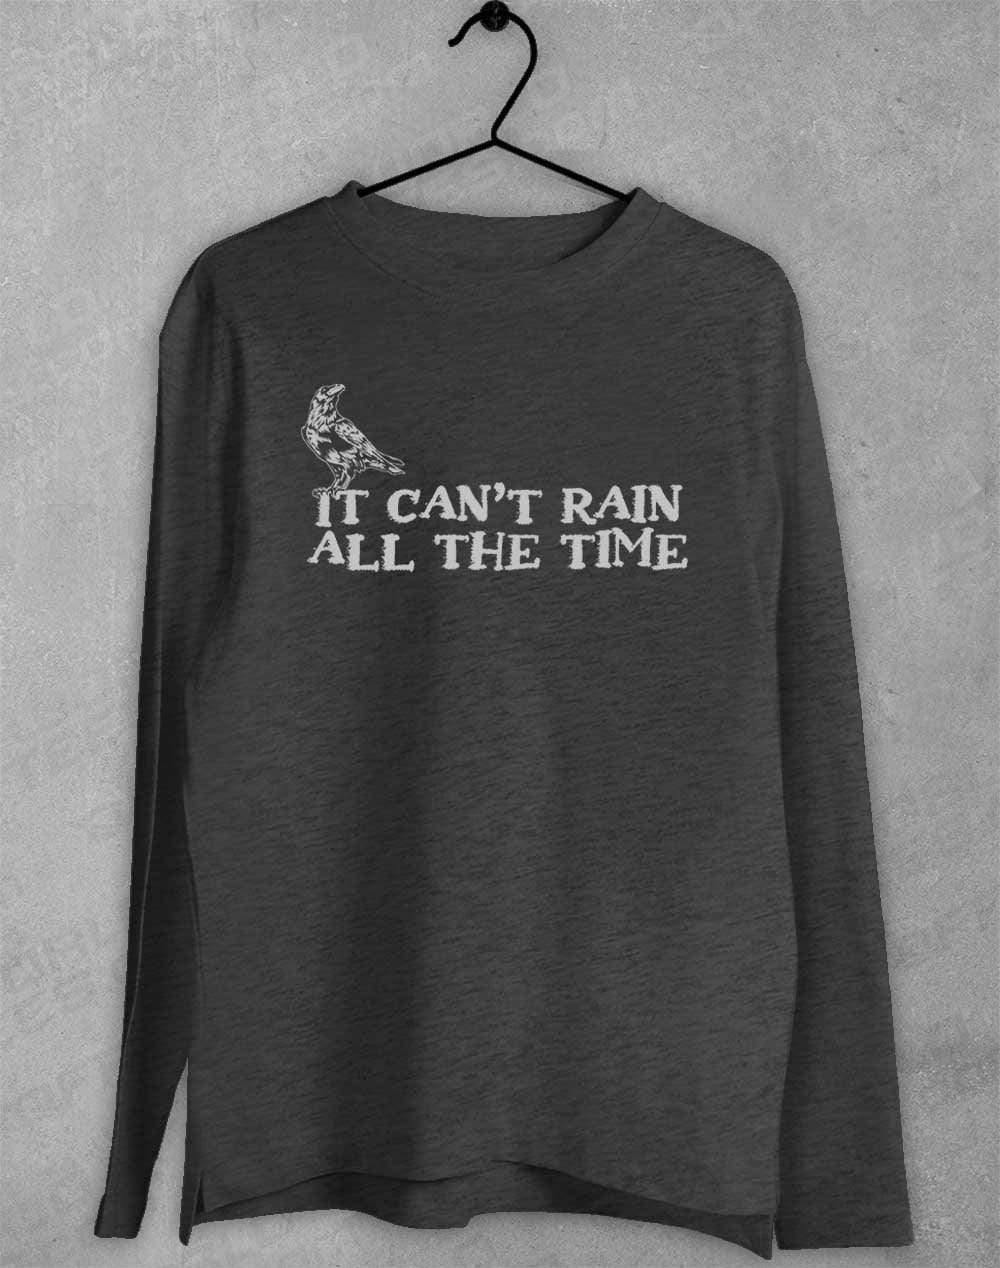 It Can't Rain All the Time Long Sleeve T-Shirt S / Dark Heather  - Off World Tees